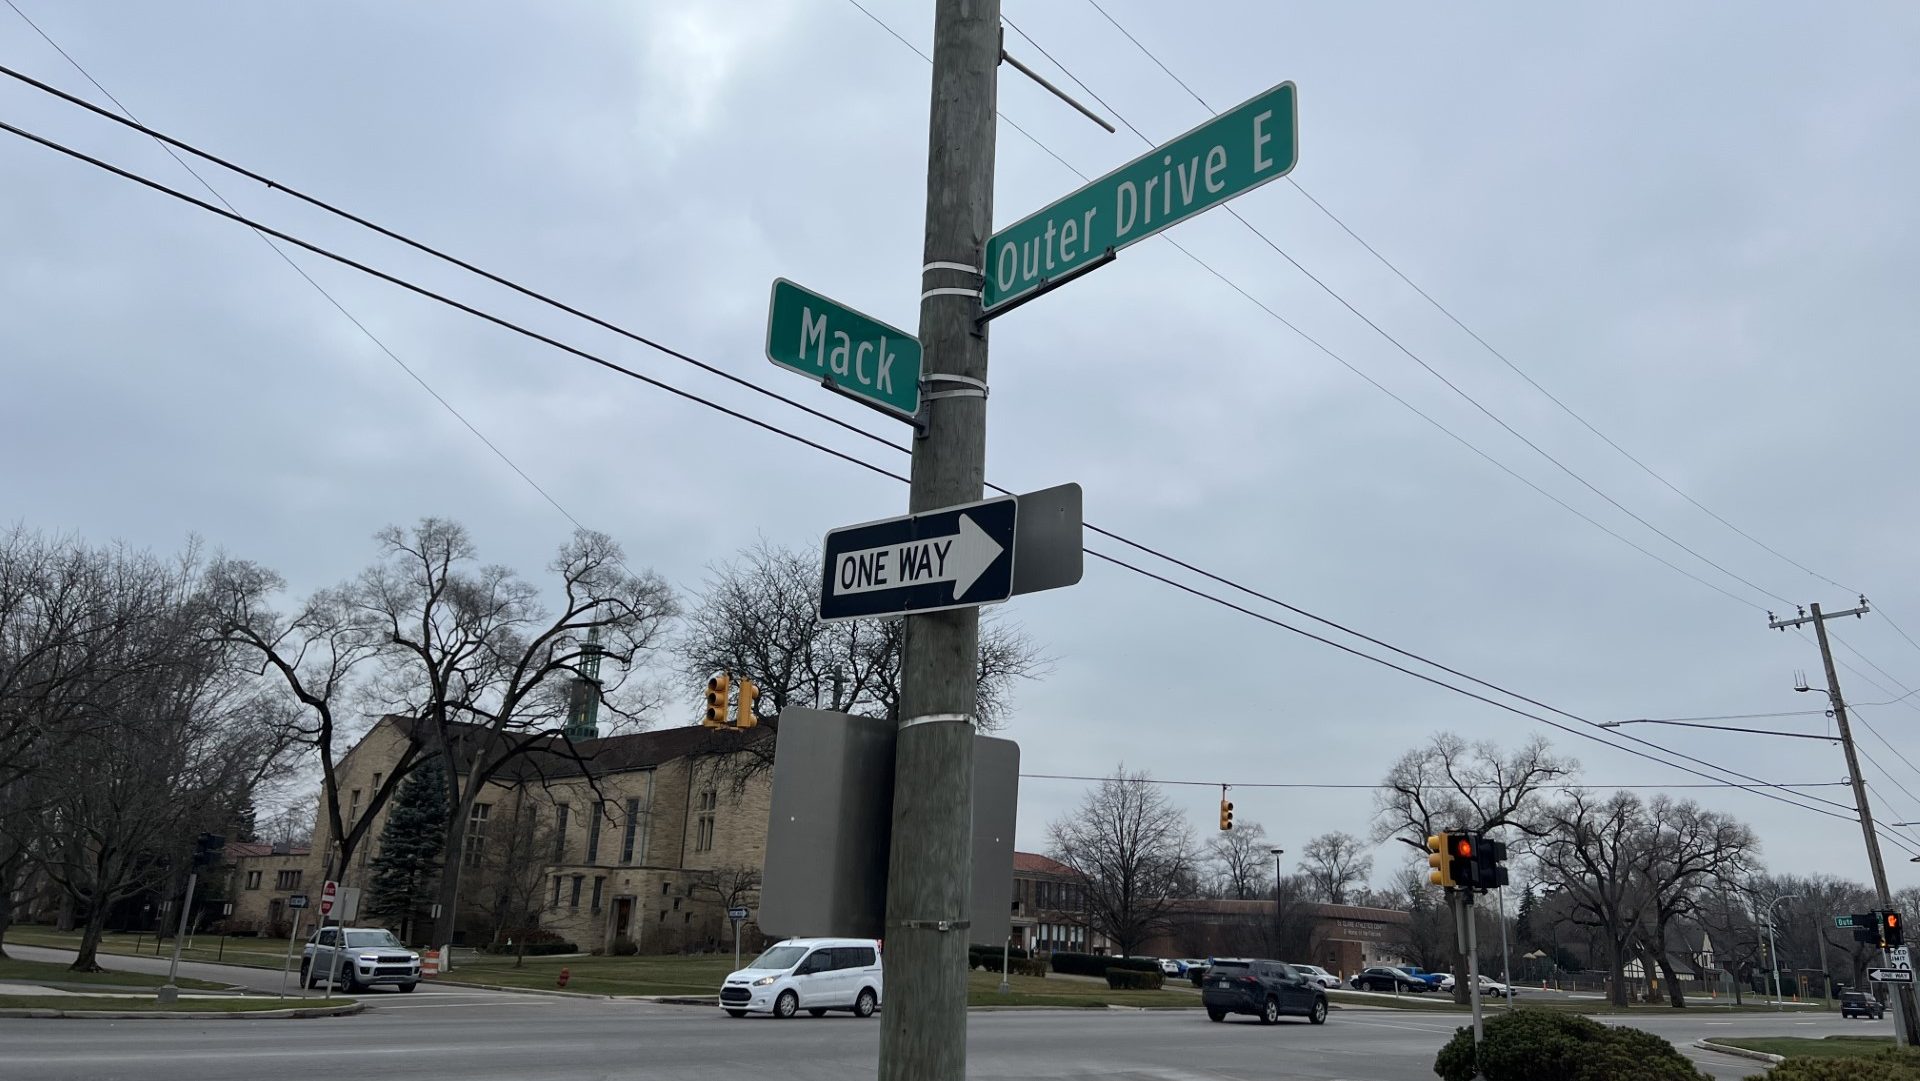 The intersection of Mack Avenue and E. Outer Drive.